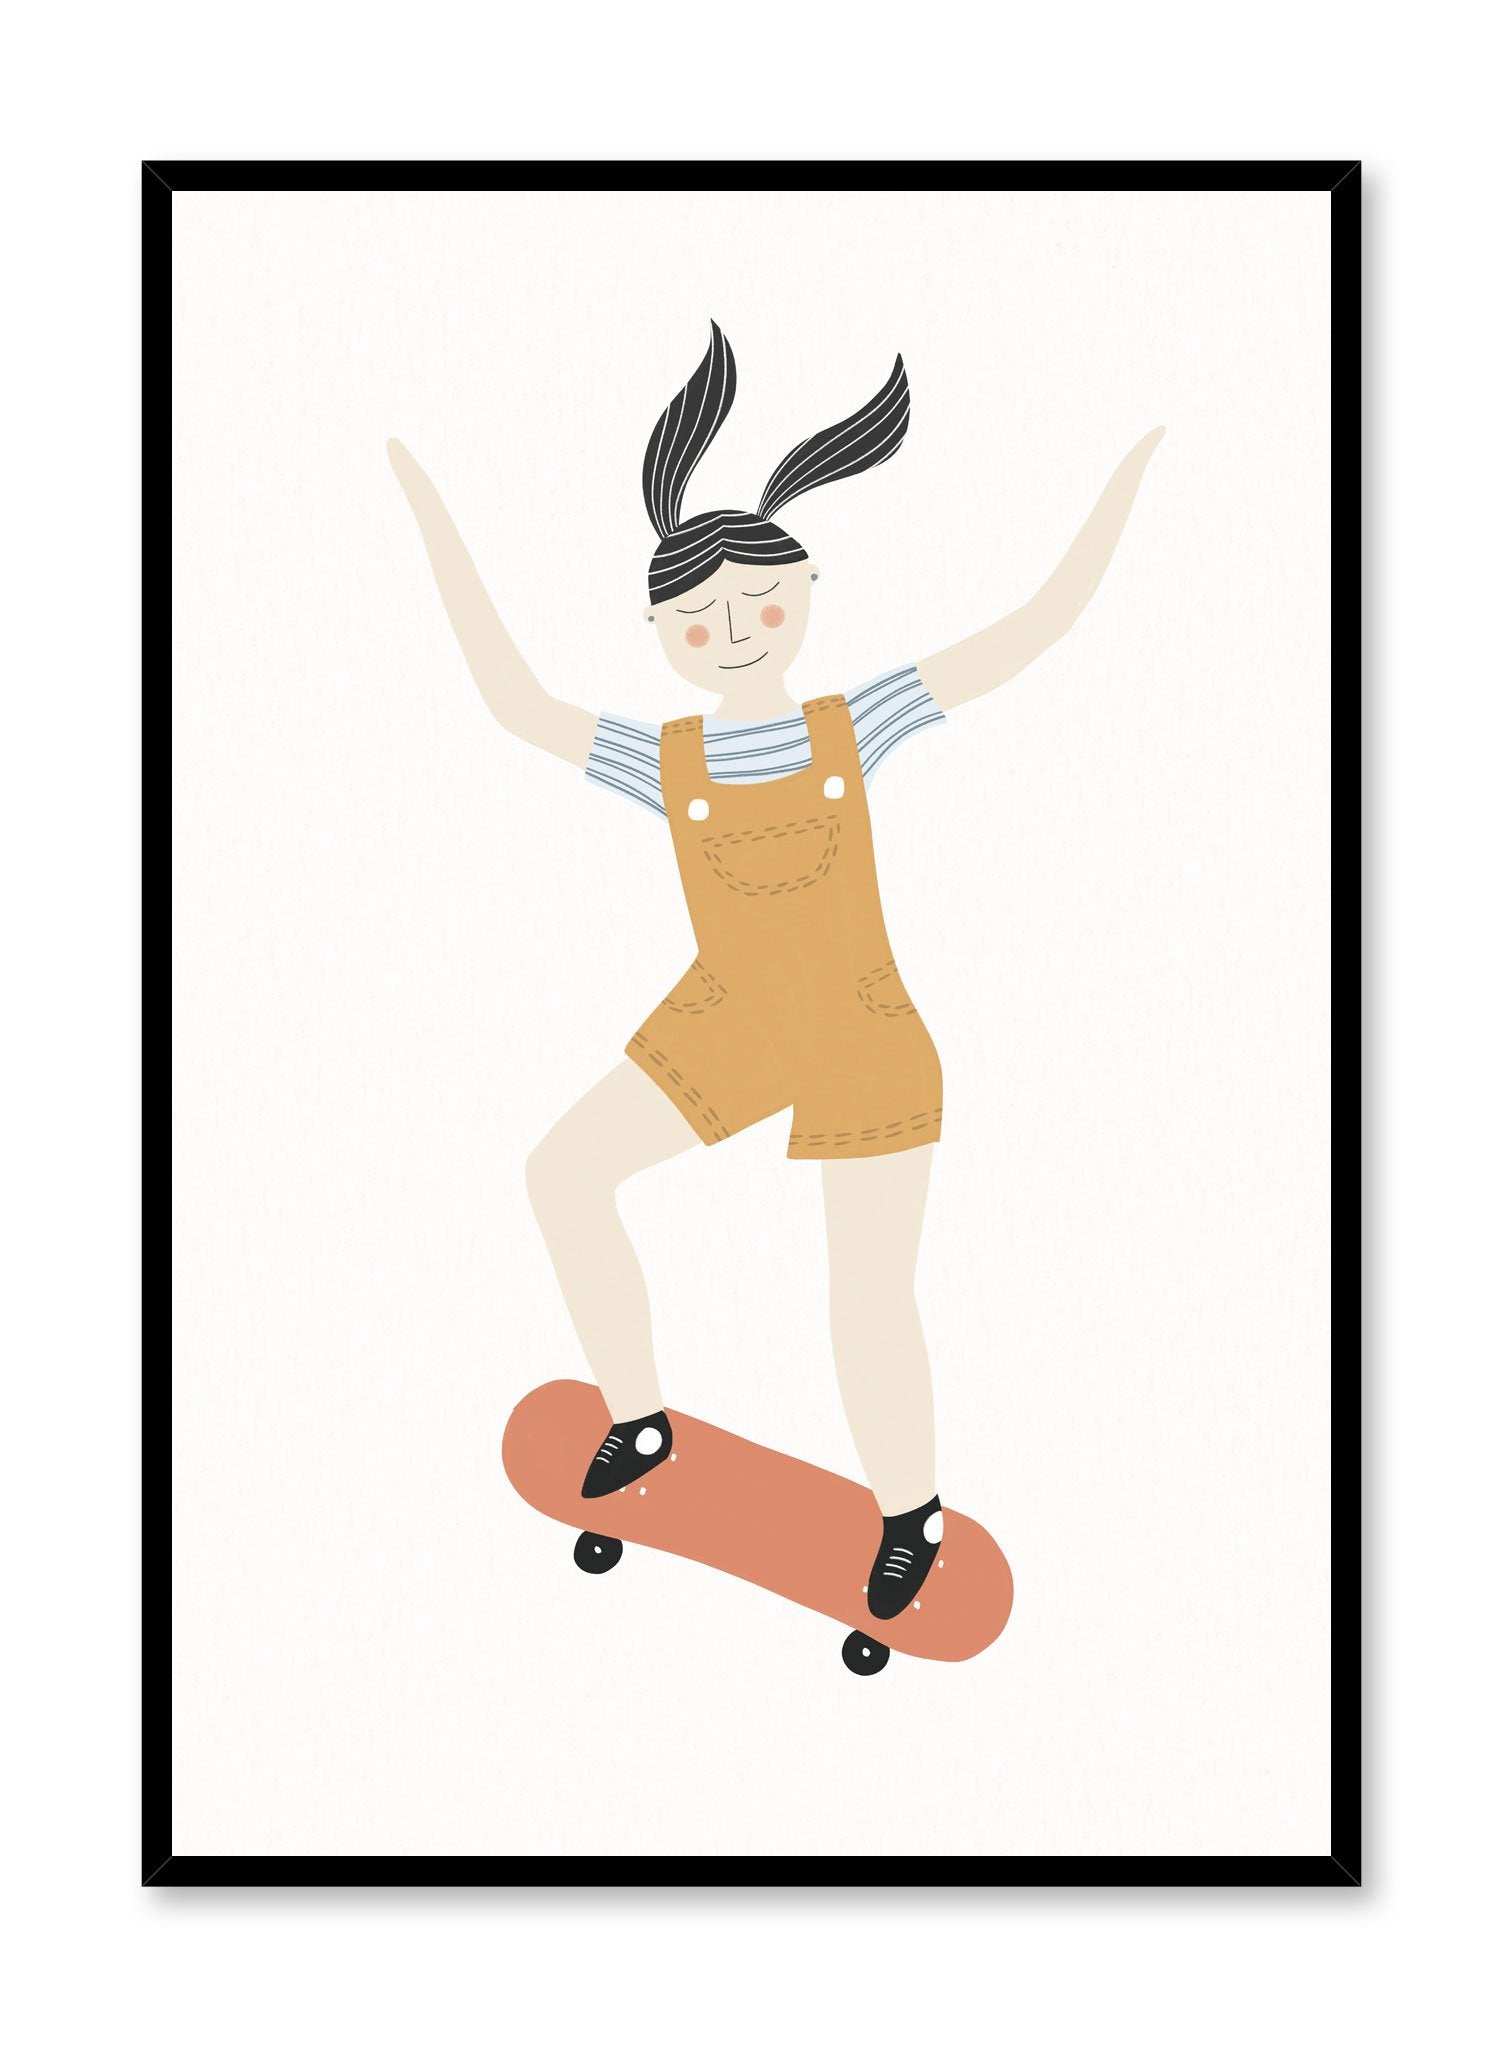 S8ter Girl is a minimalist illustration by Opposite Wall of a girl enjoying her ride on her skateboard.